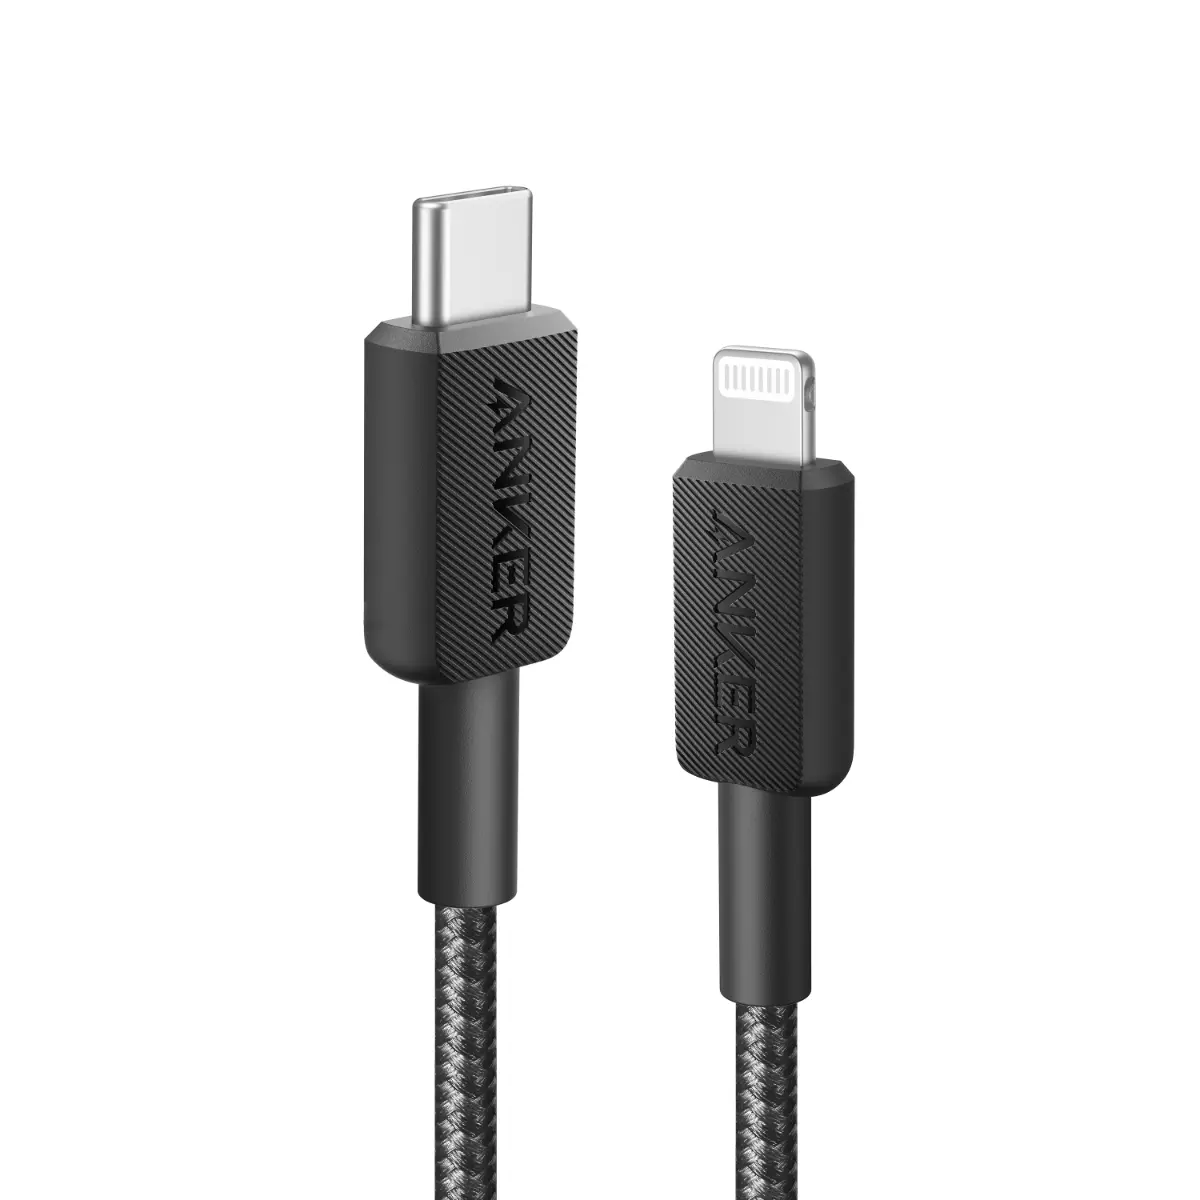 Anker 322 USB-C to Lightning Cable (6ft Braided) - Black